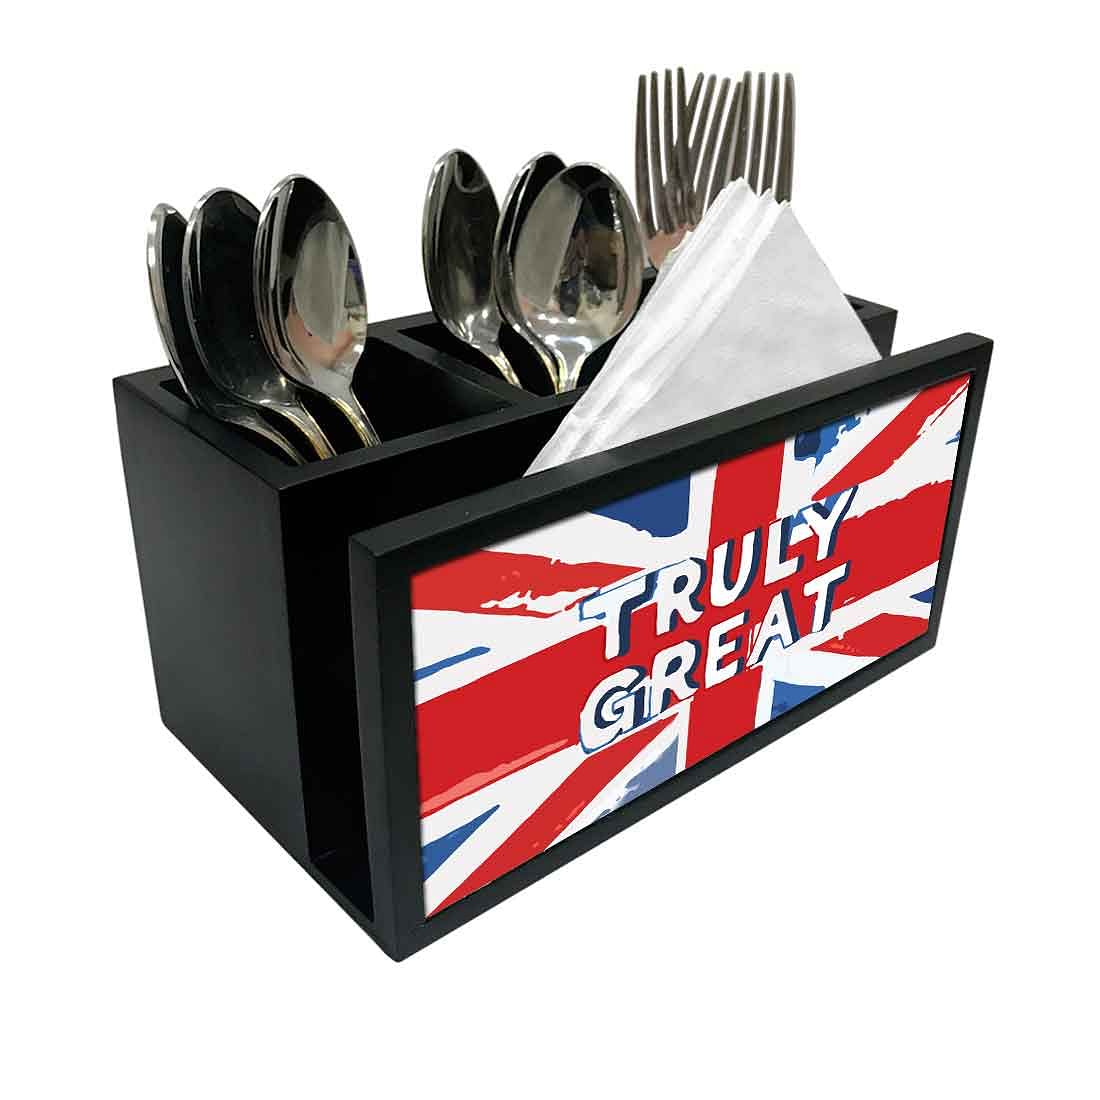 Cutlery Tissue Holder Napkin Stand -  Truly Great Nutcase